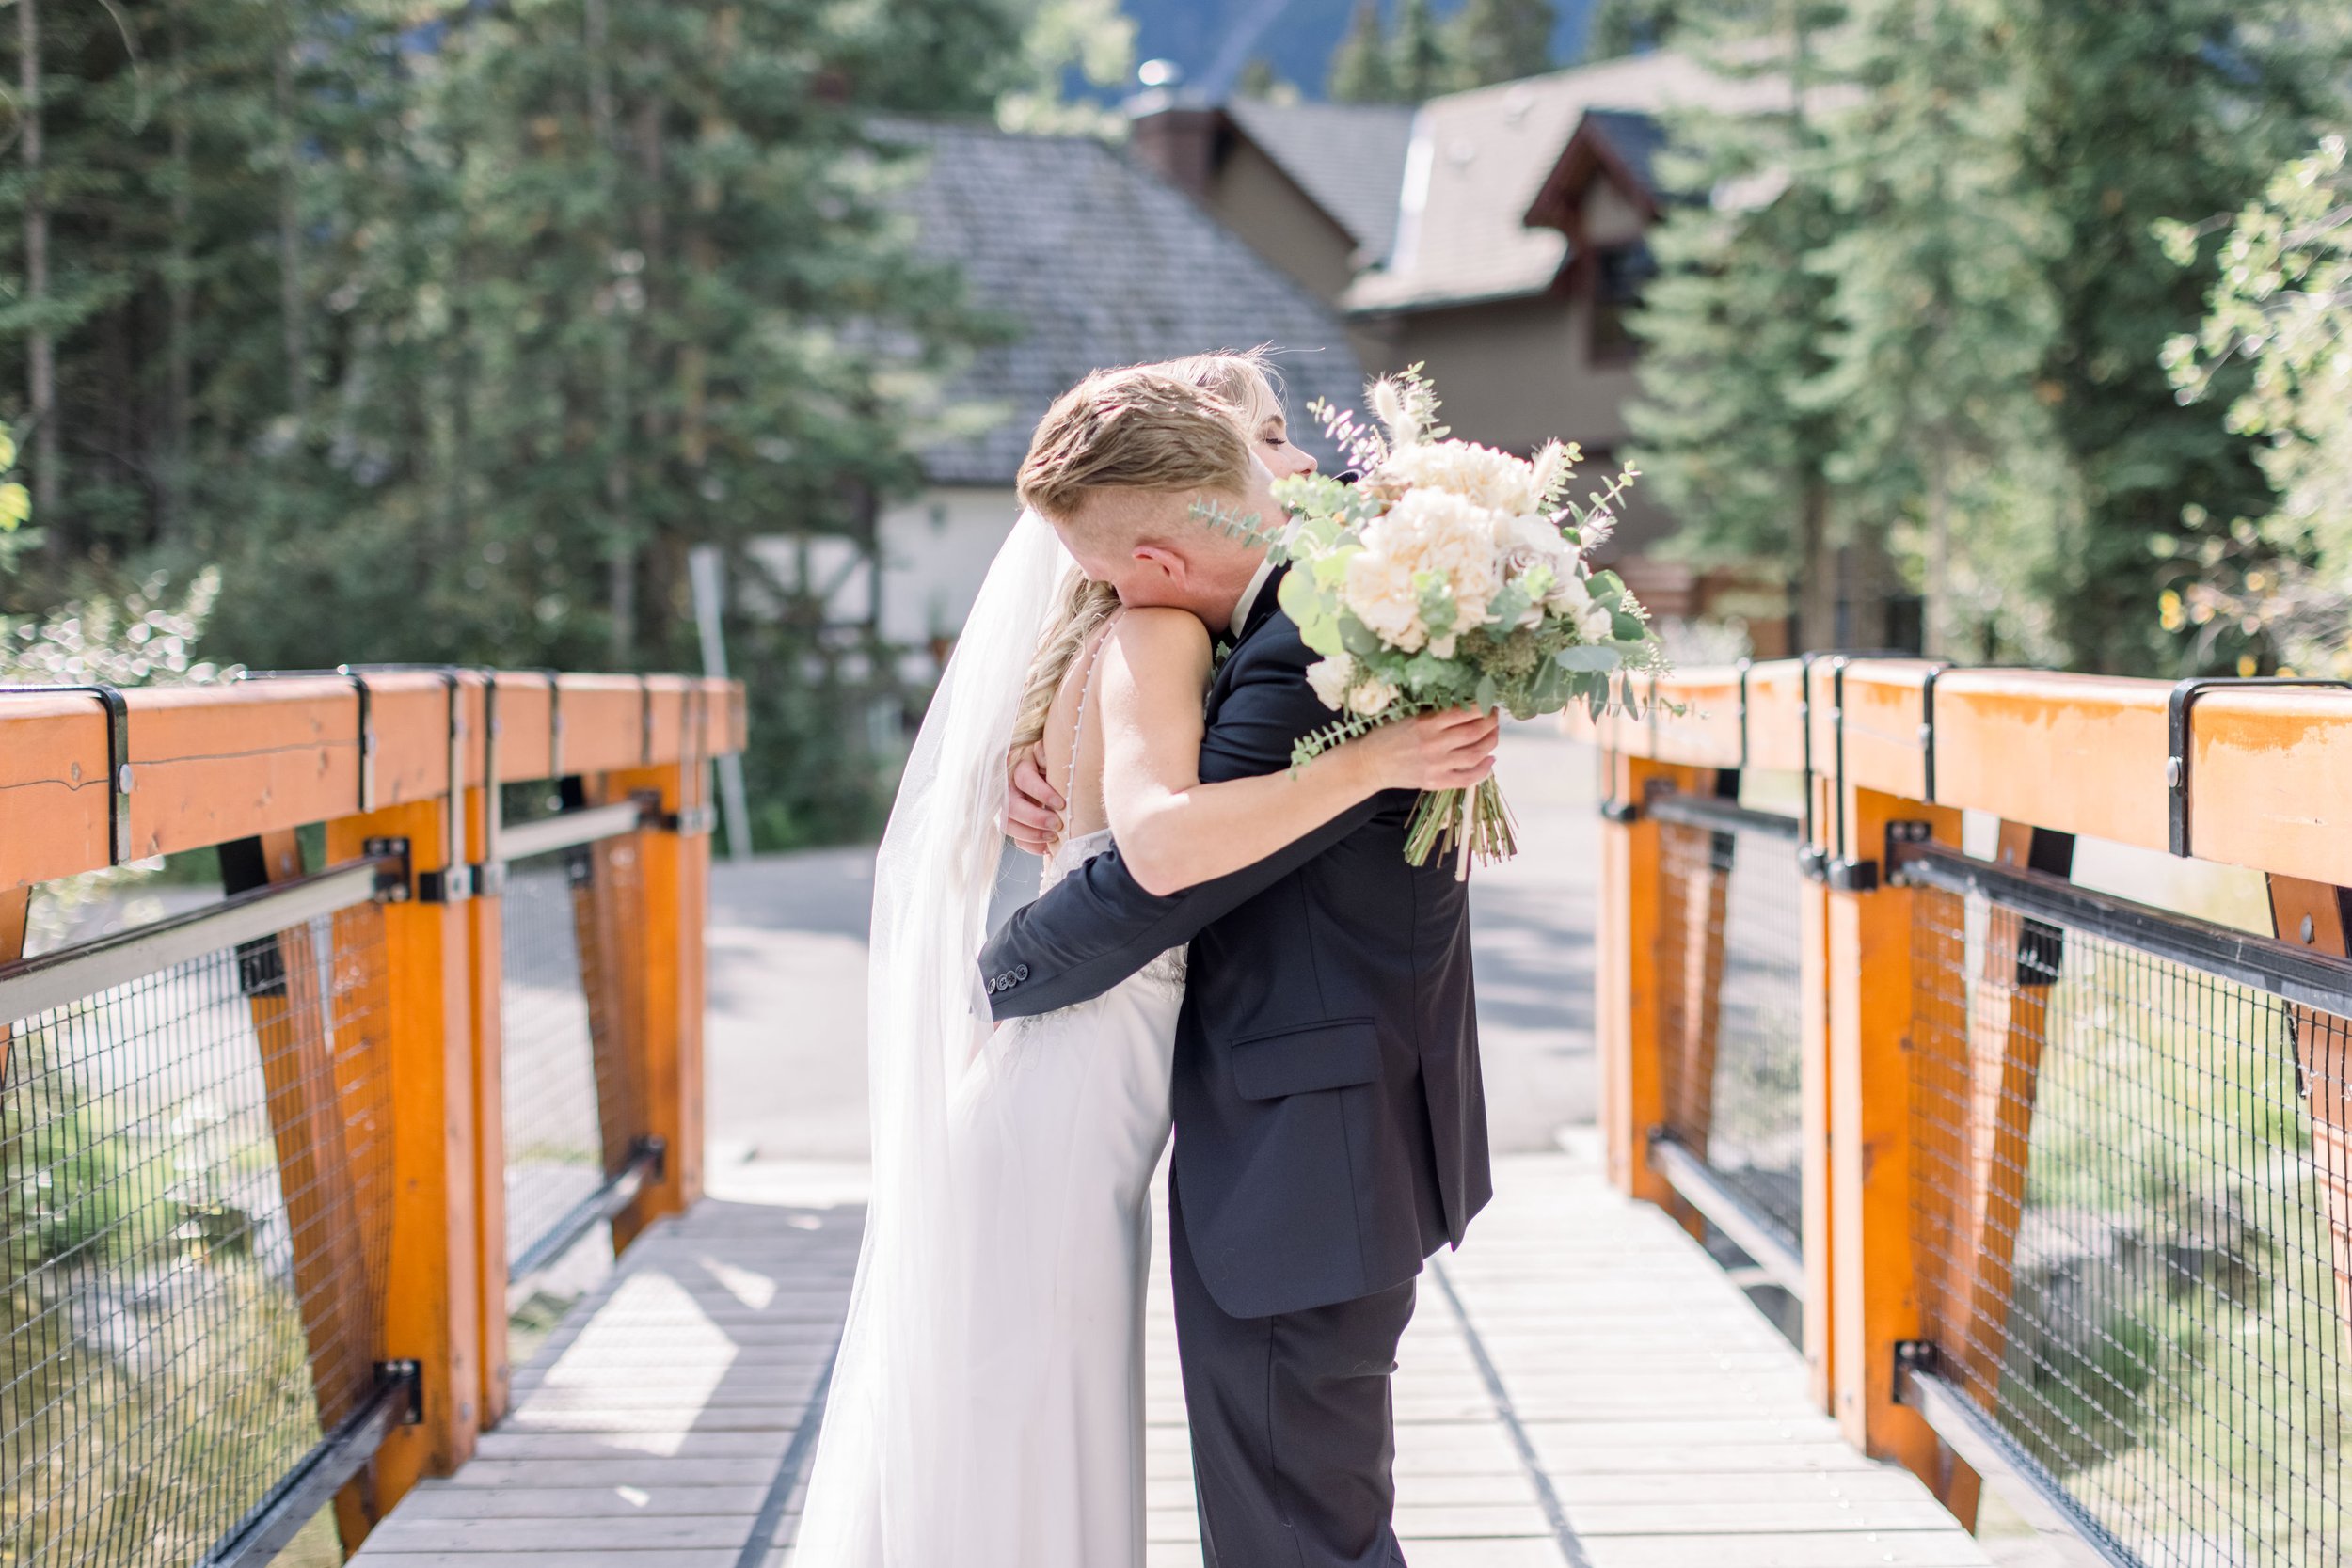  Bride and groom hug on a wooden forest bridge in the Alberta mountains by Chelsea Mason Photography. hugging bride groom #Albertaweddings #shesaidyes #Albertaweddingphotographers #SilvertipGolfCourse #ChelseaMasonPhotography #ChelseaMasonWeddings  